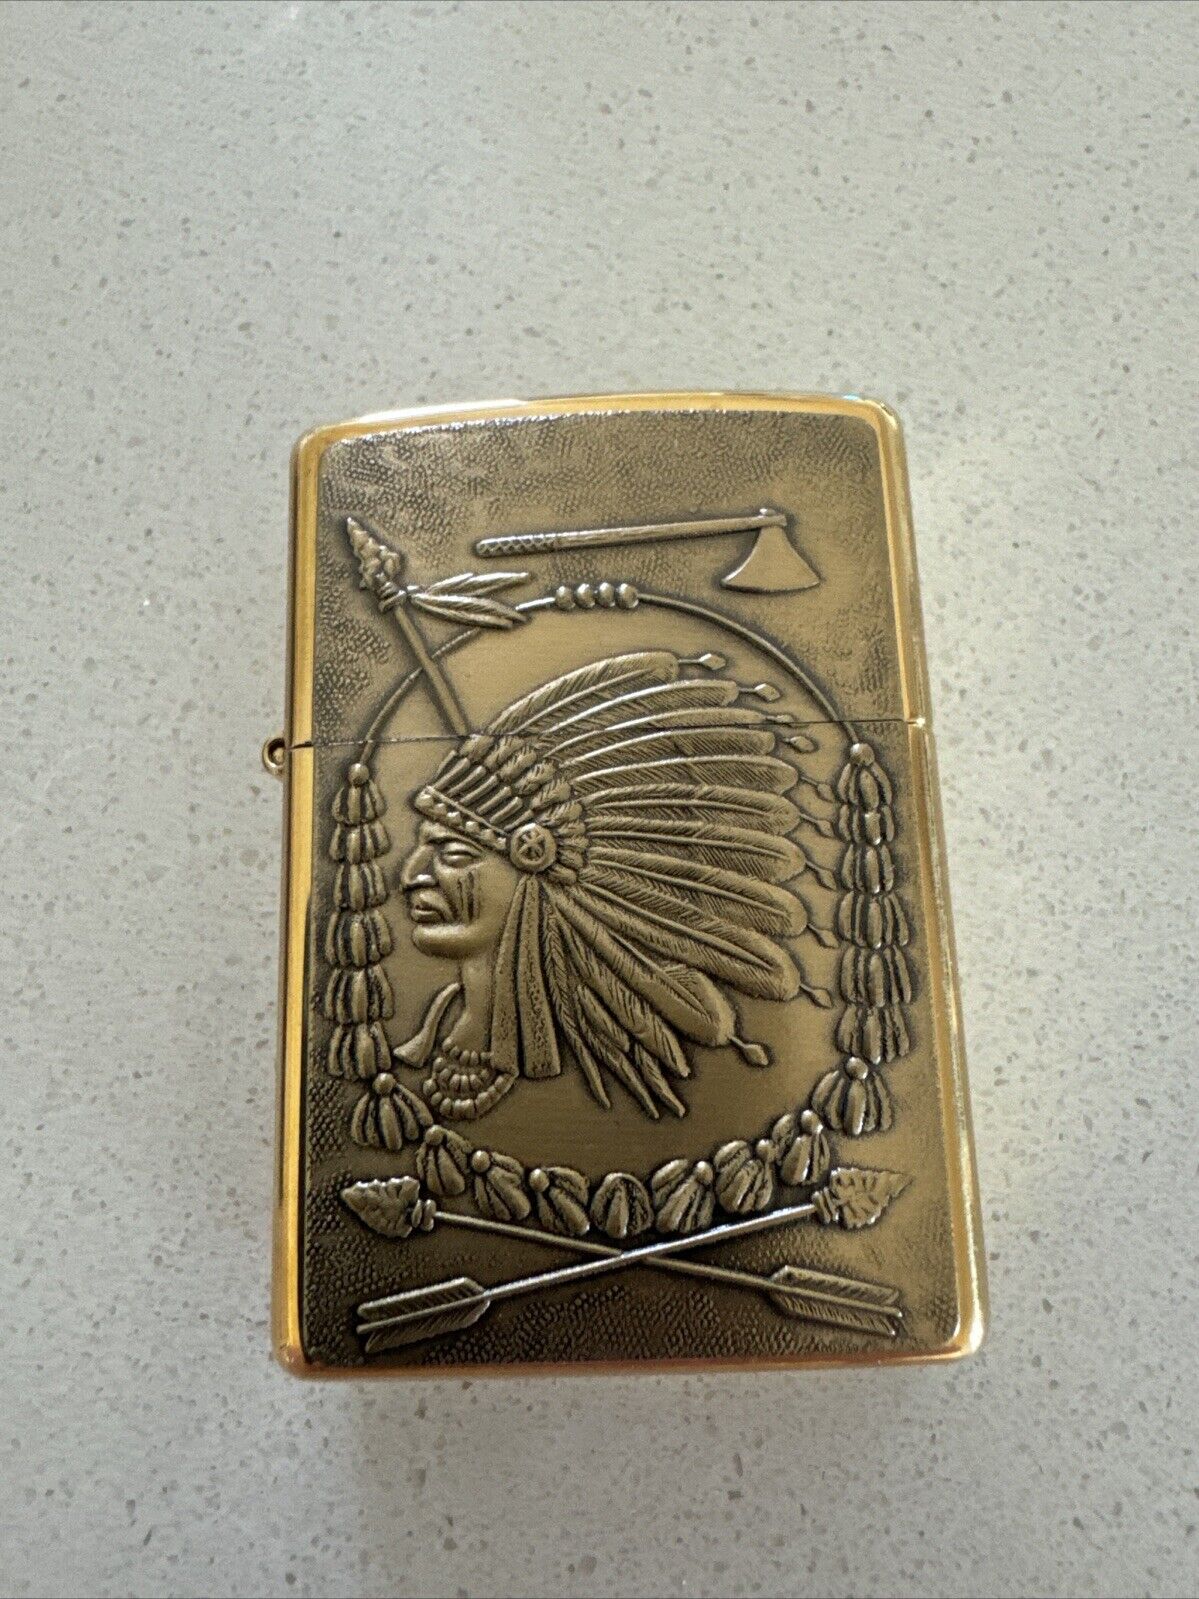 Chief Brass Indian Lighter - Unused, Sealed